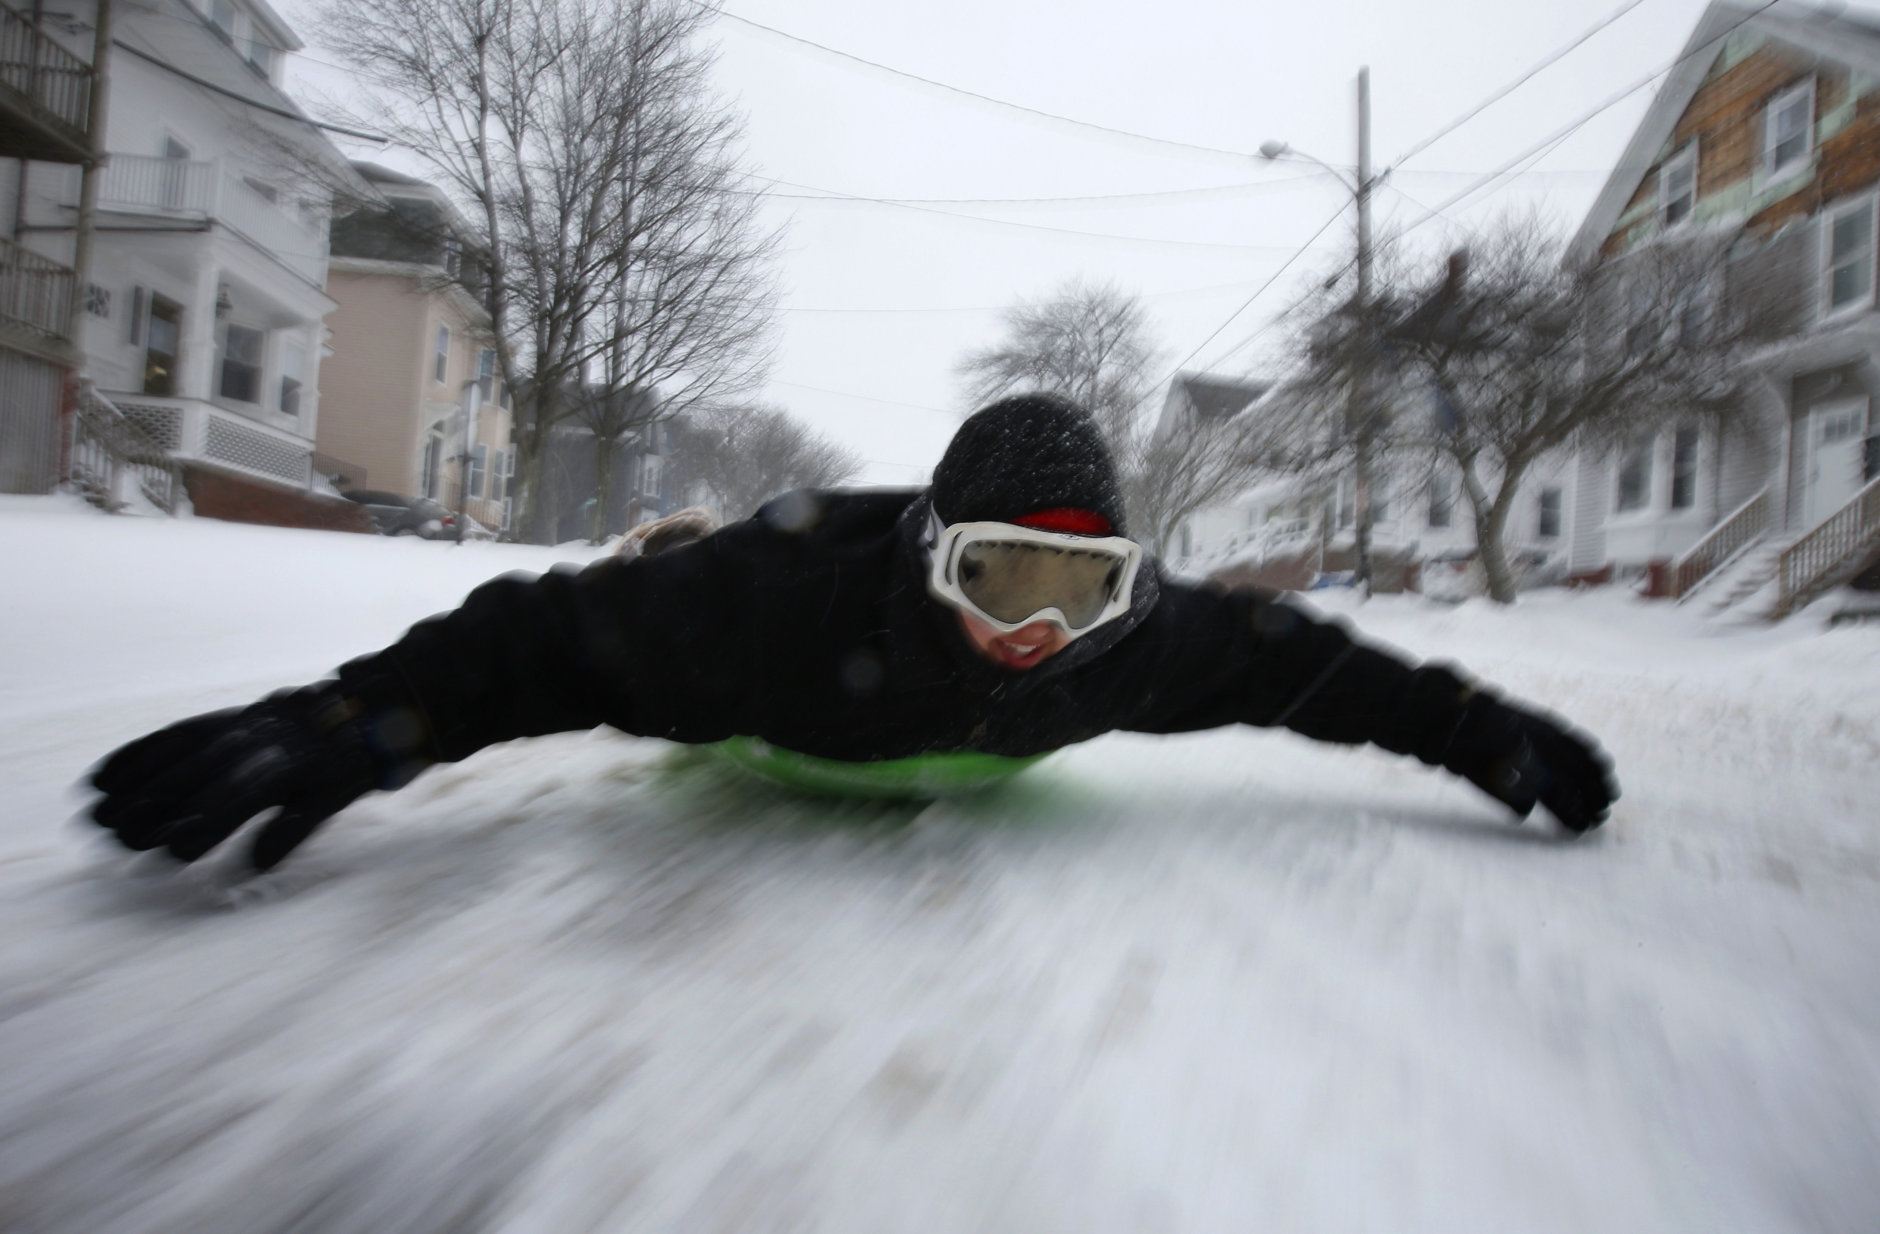 Gabby DiGiacomo, of Whitefield, Maine, slides down Congress Street in Portland, Maine, on a saucer during the latest winter storm, Tuesday, March 13, 2018, in Portland, Maine. With the exception of snowplows, the streets had very little traffic during the third major nor'easter in two weeks to slam the storm-battered Northeast. (AP Photo/Robert F. Bukaty)